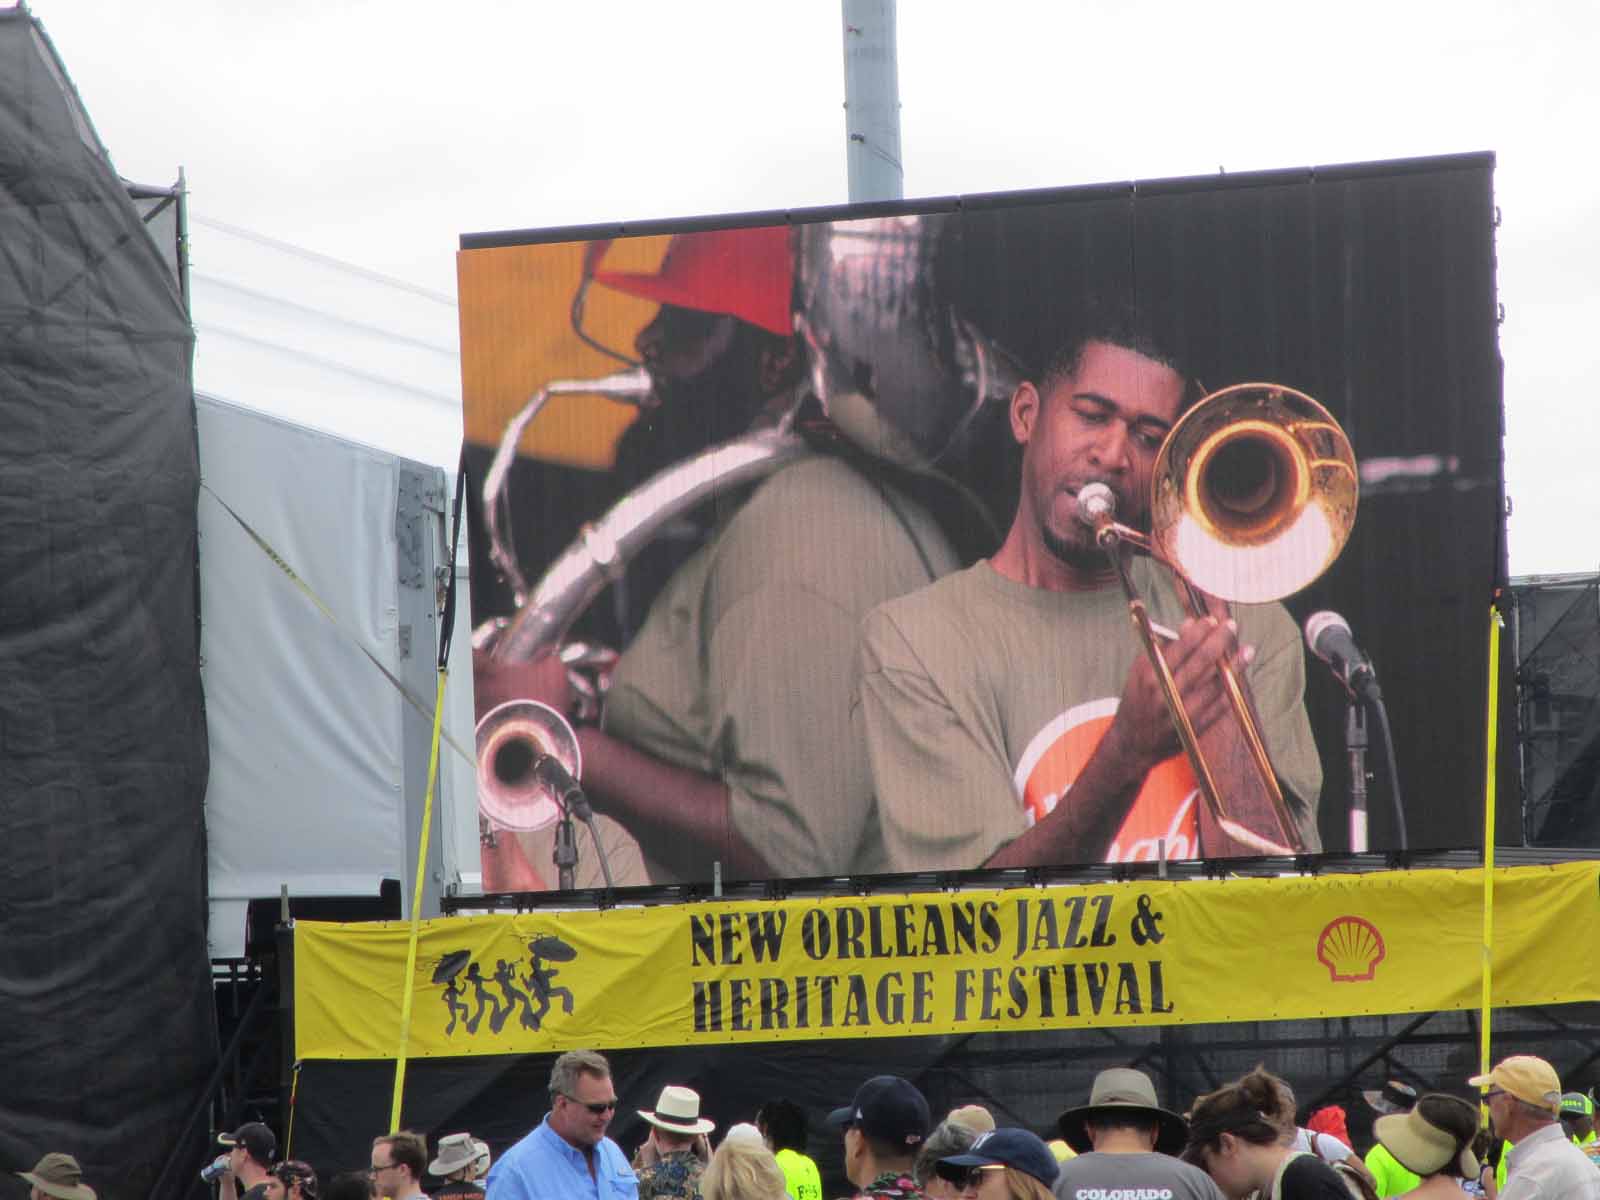 The Hot 8 Brass Band on the big screen